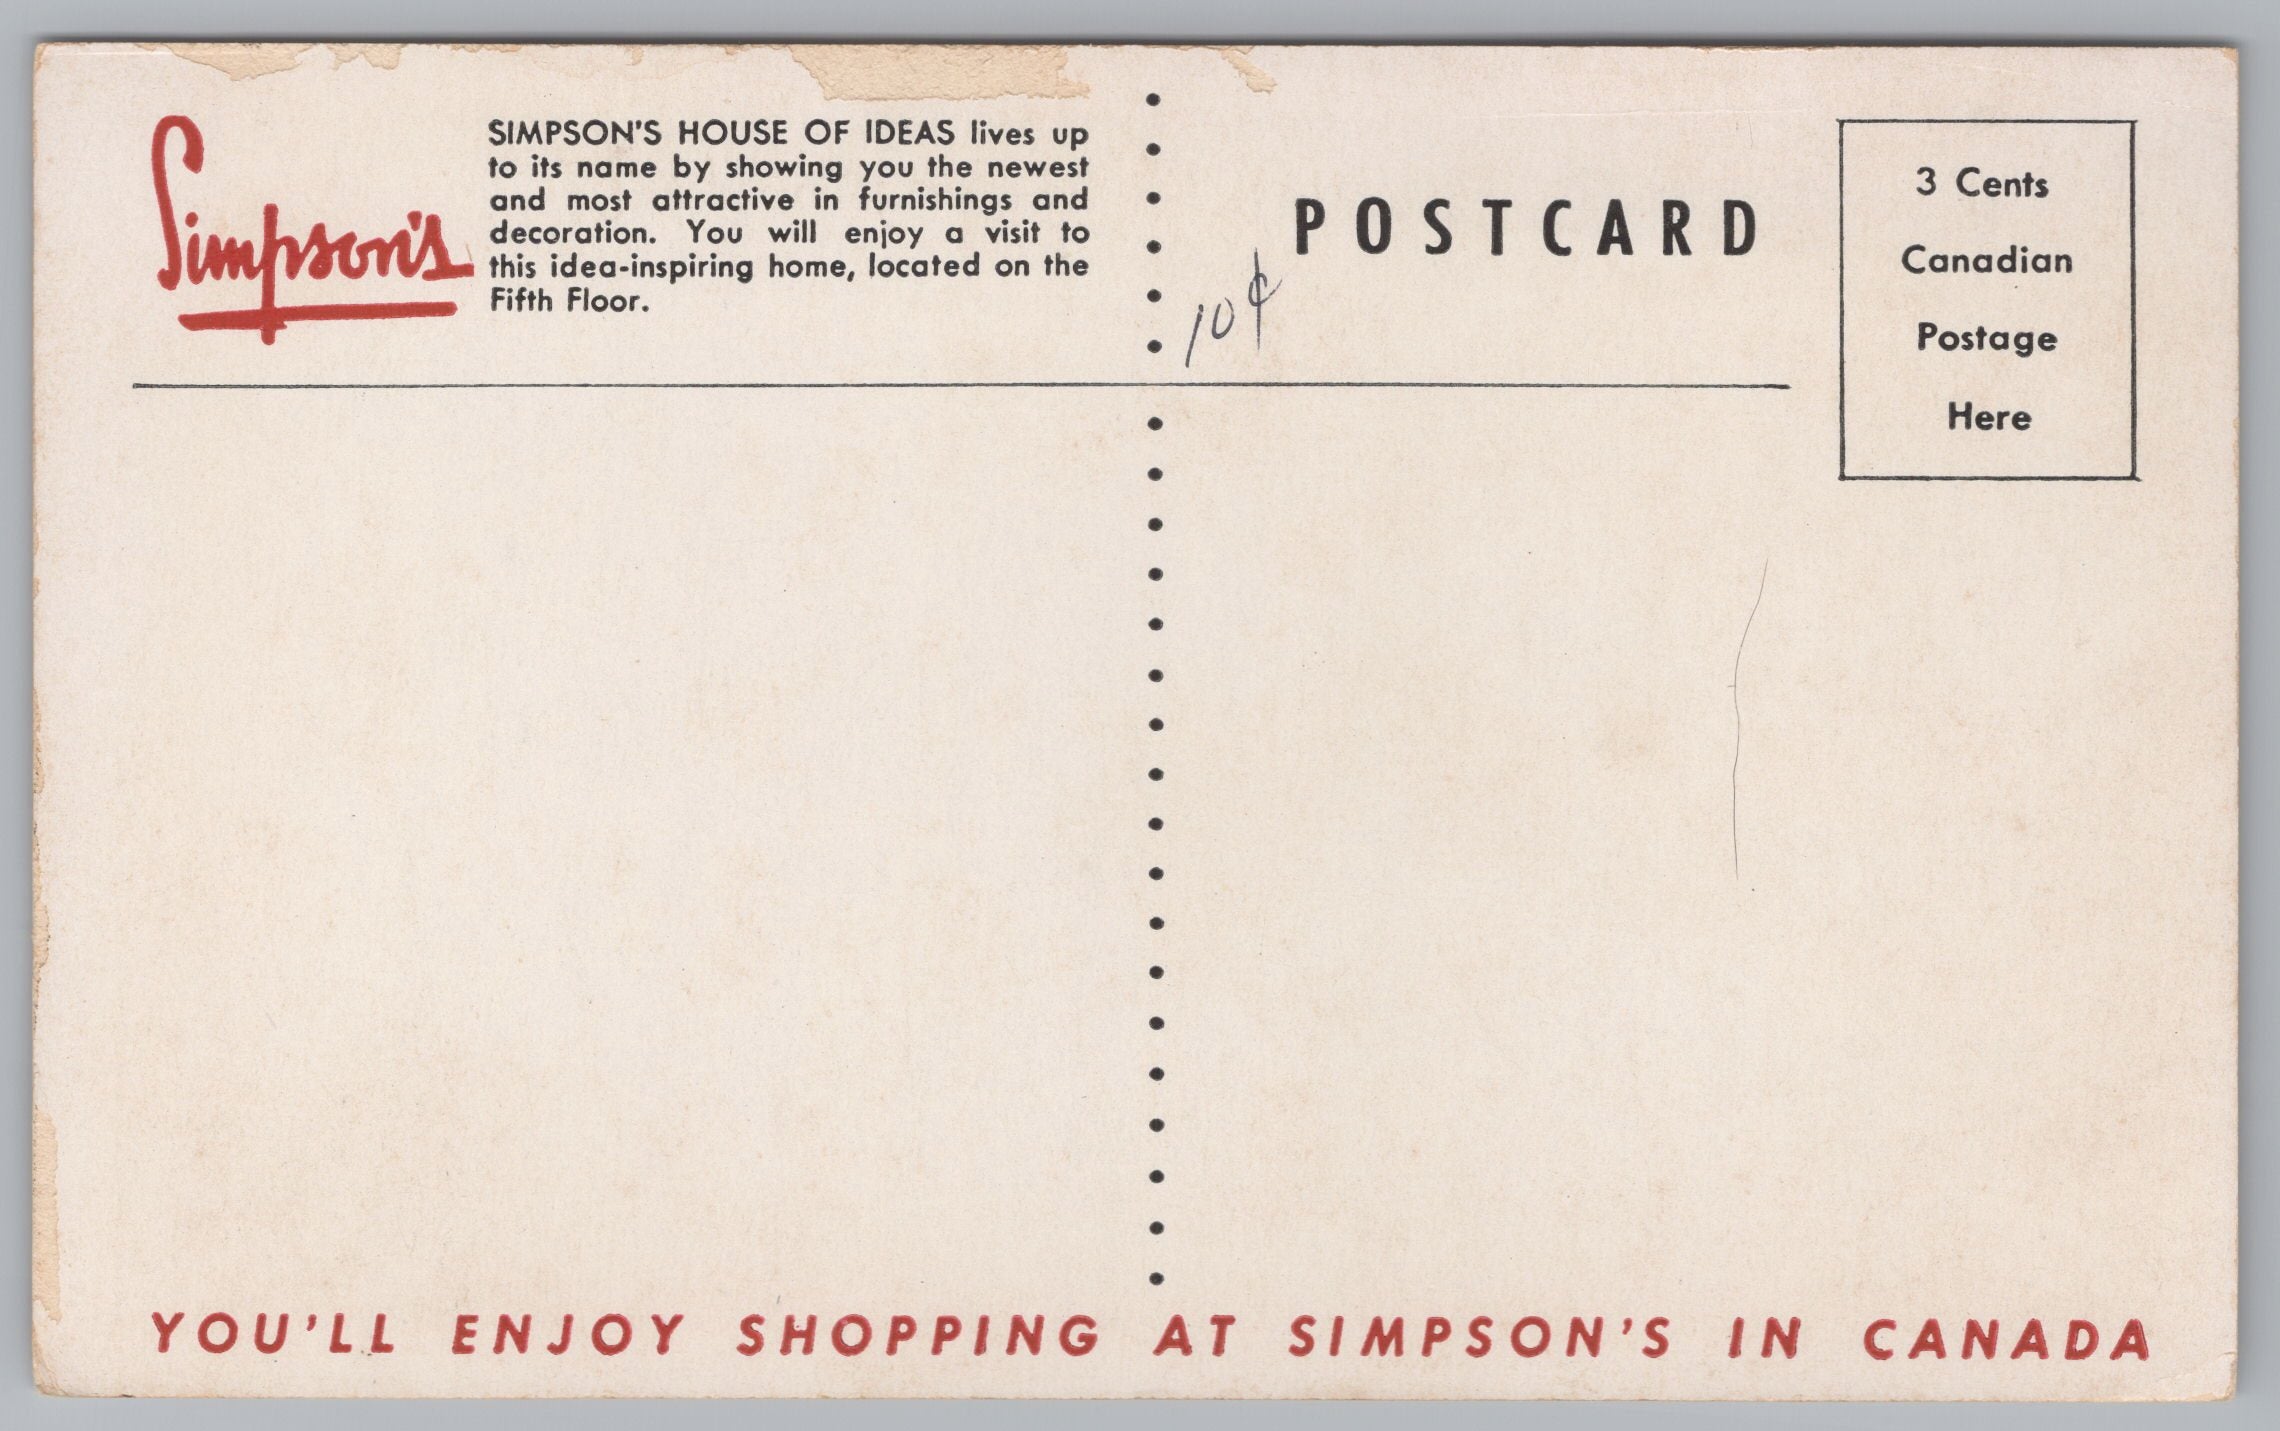 Simpsons House Of Ideas, 5th Floor Of The Simpsons Hotel, Vintage Post Card.